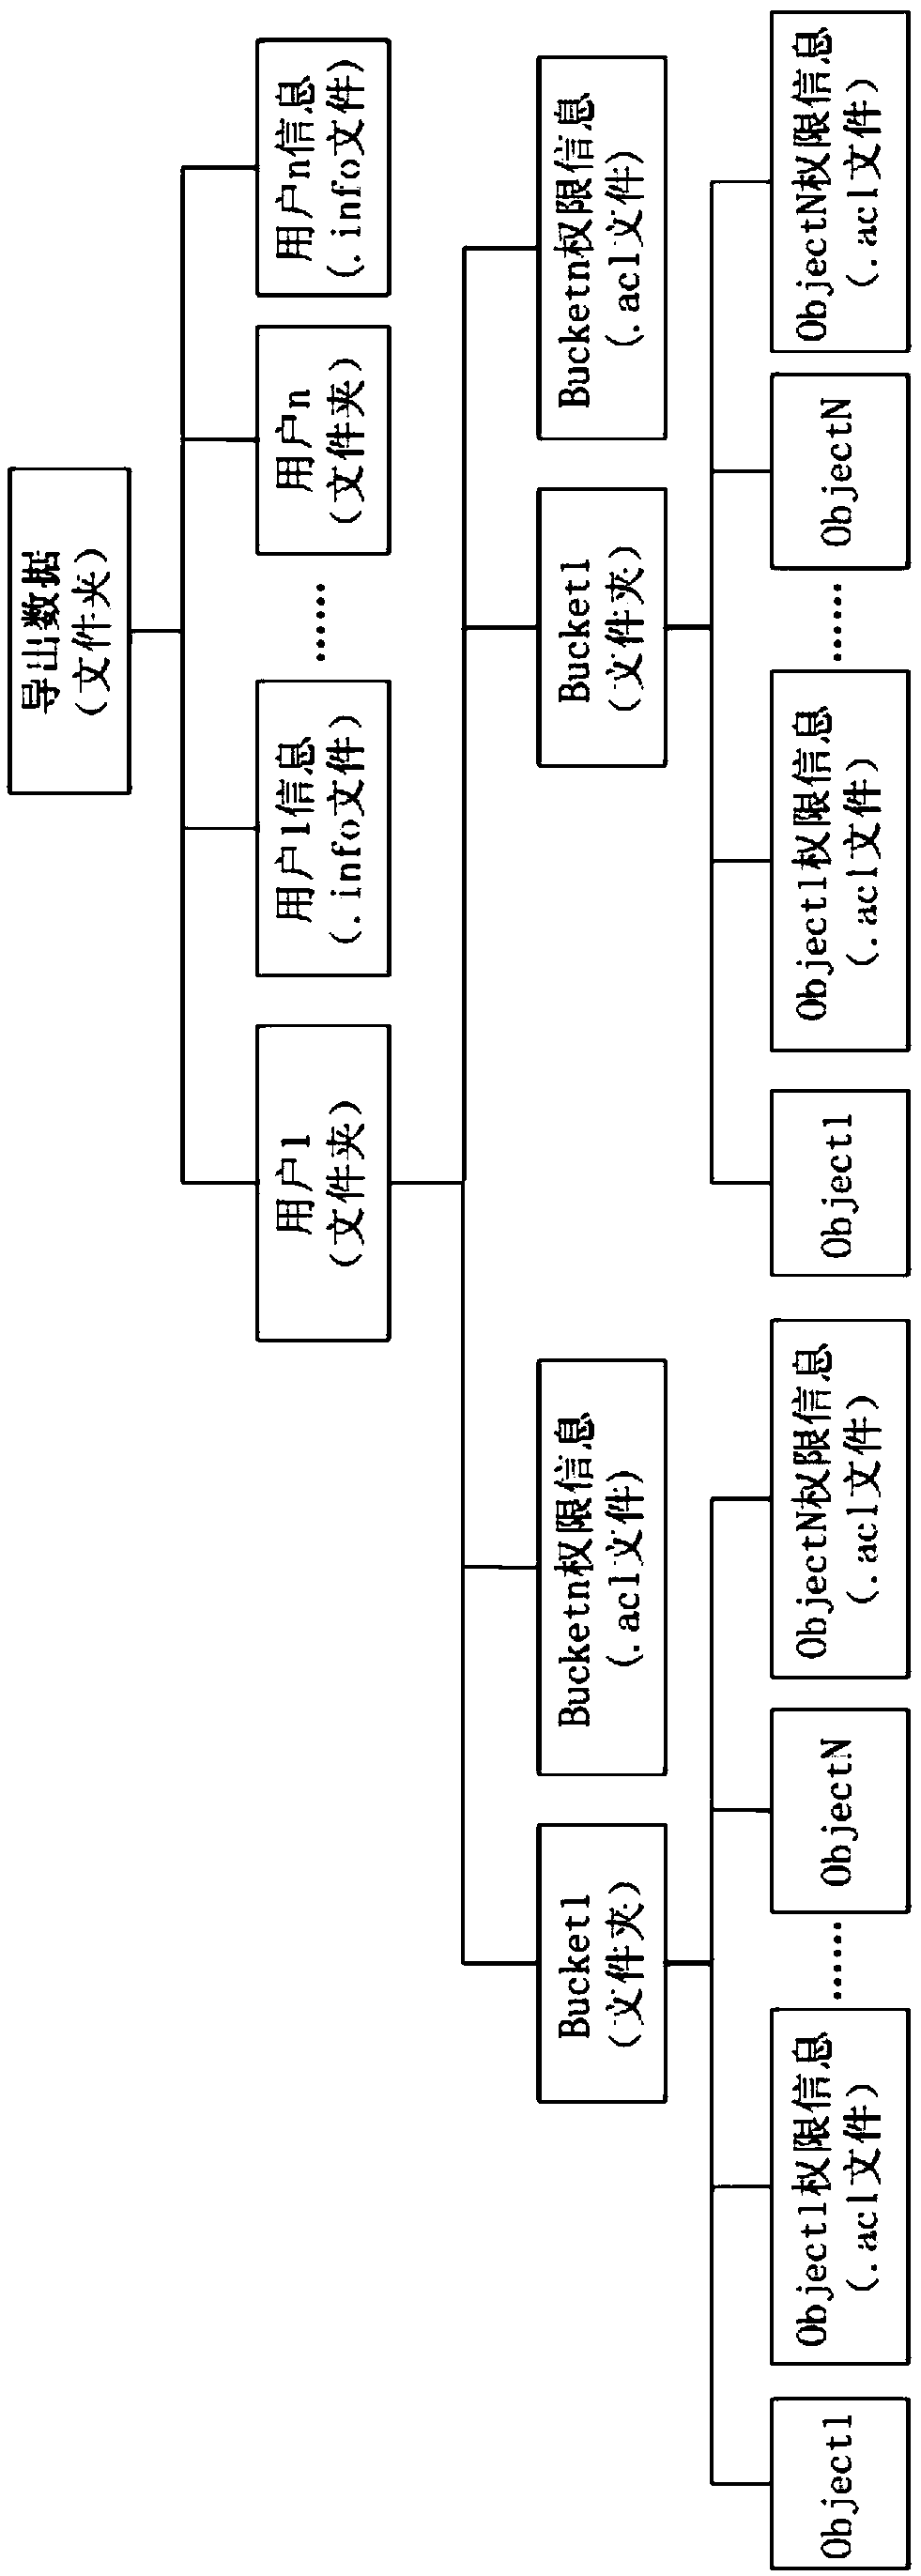 Method and system for data migration based on object storage